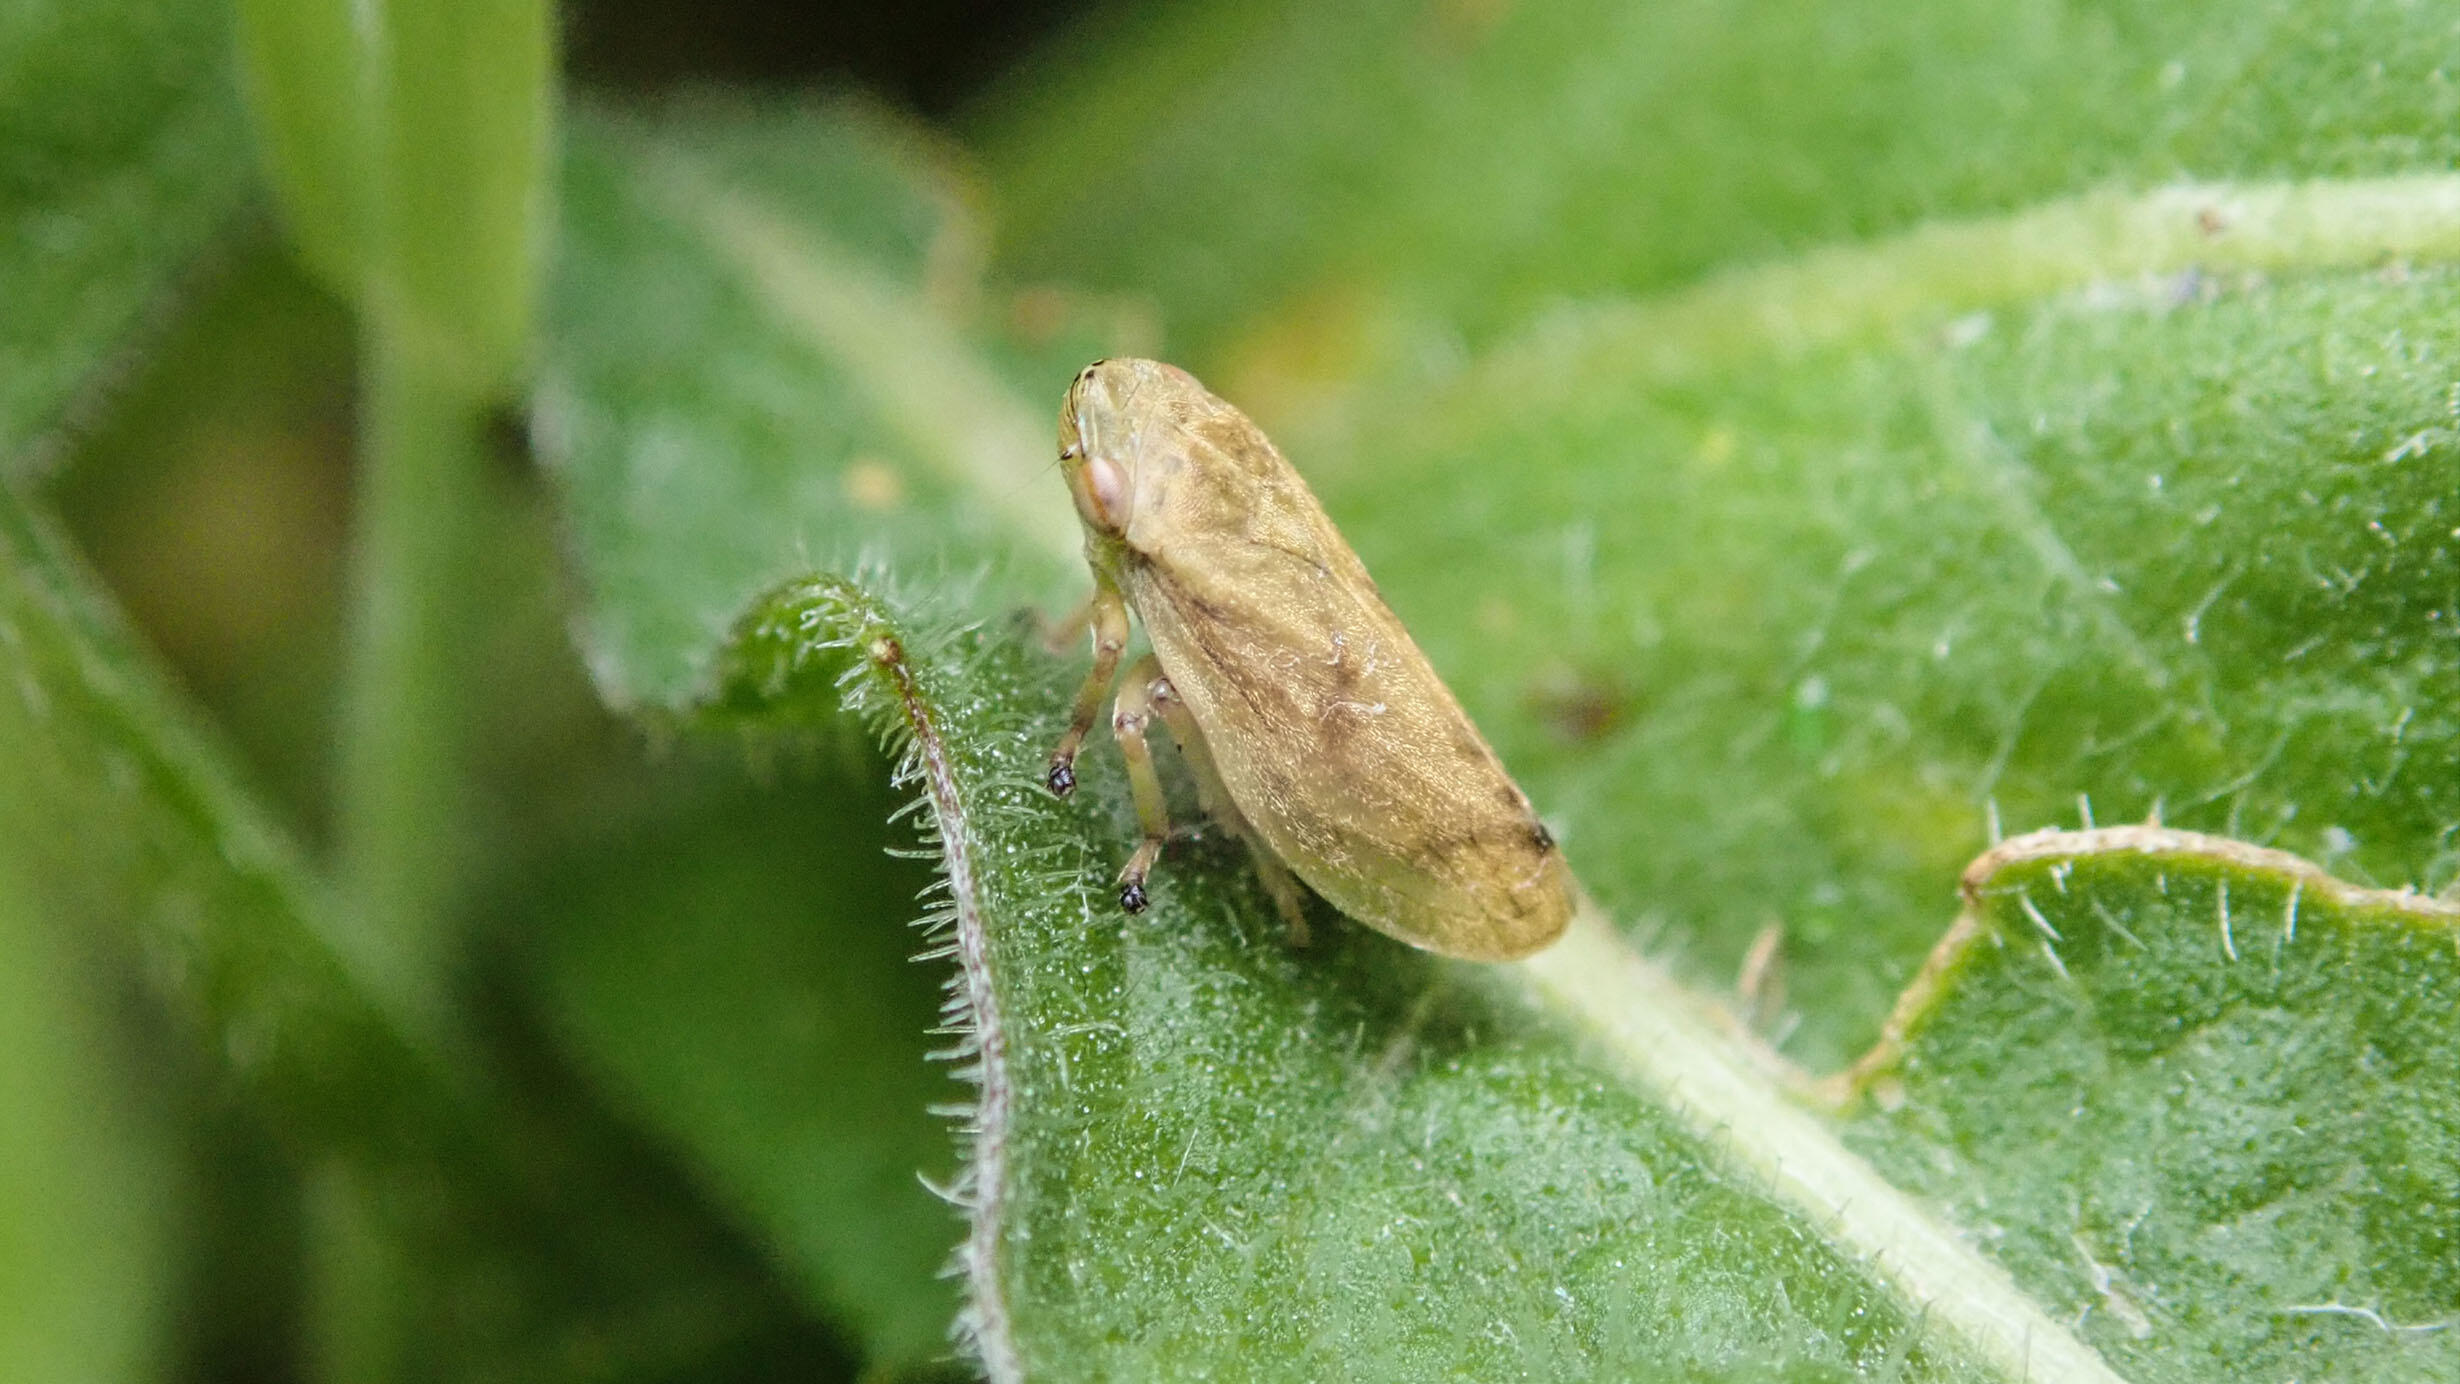 Close-up of an adult meadow spittlebug, a round, winged bug, standing on a leaf.